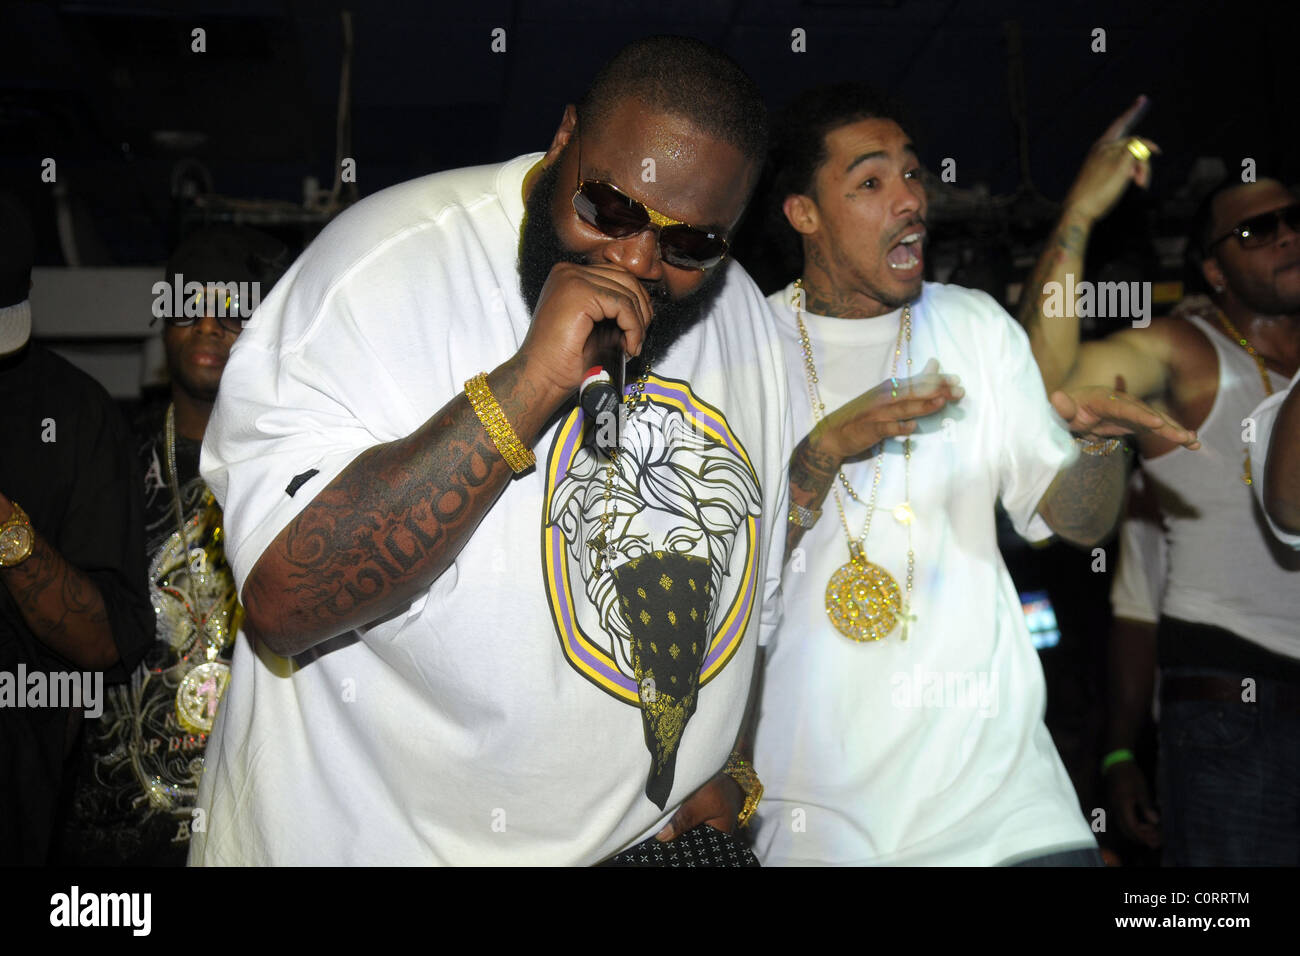 Rick Ross and Triple C performing at 'Power 96 Presents: The World's Largest Office Christmas Party' at Cafe Iguana Pines. Stock Photo